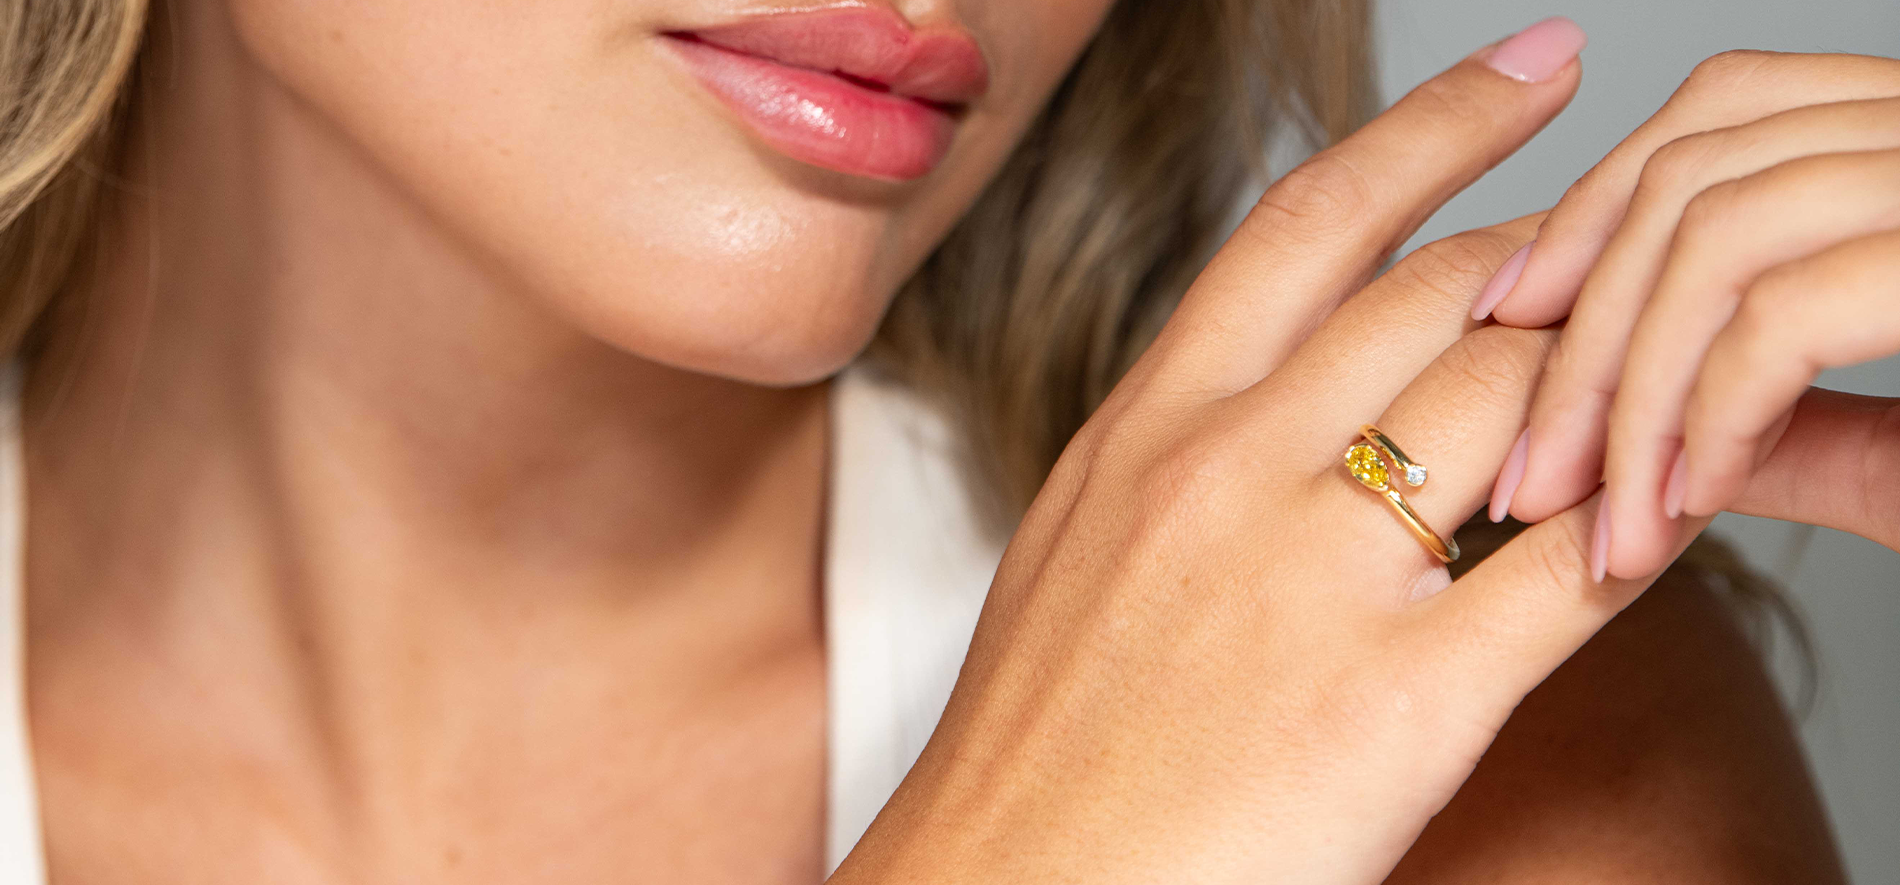 Choosing Your Shine: Understanding the Differences Between 14K, 18K Gold, and Platinum Jewelry